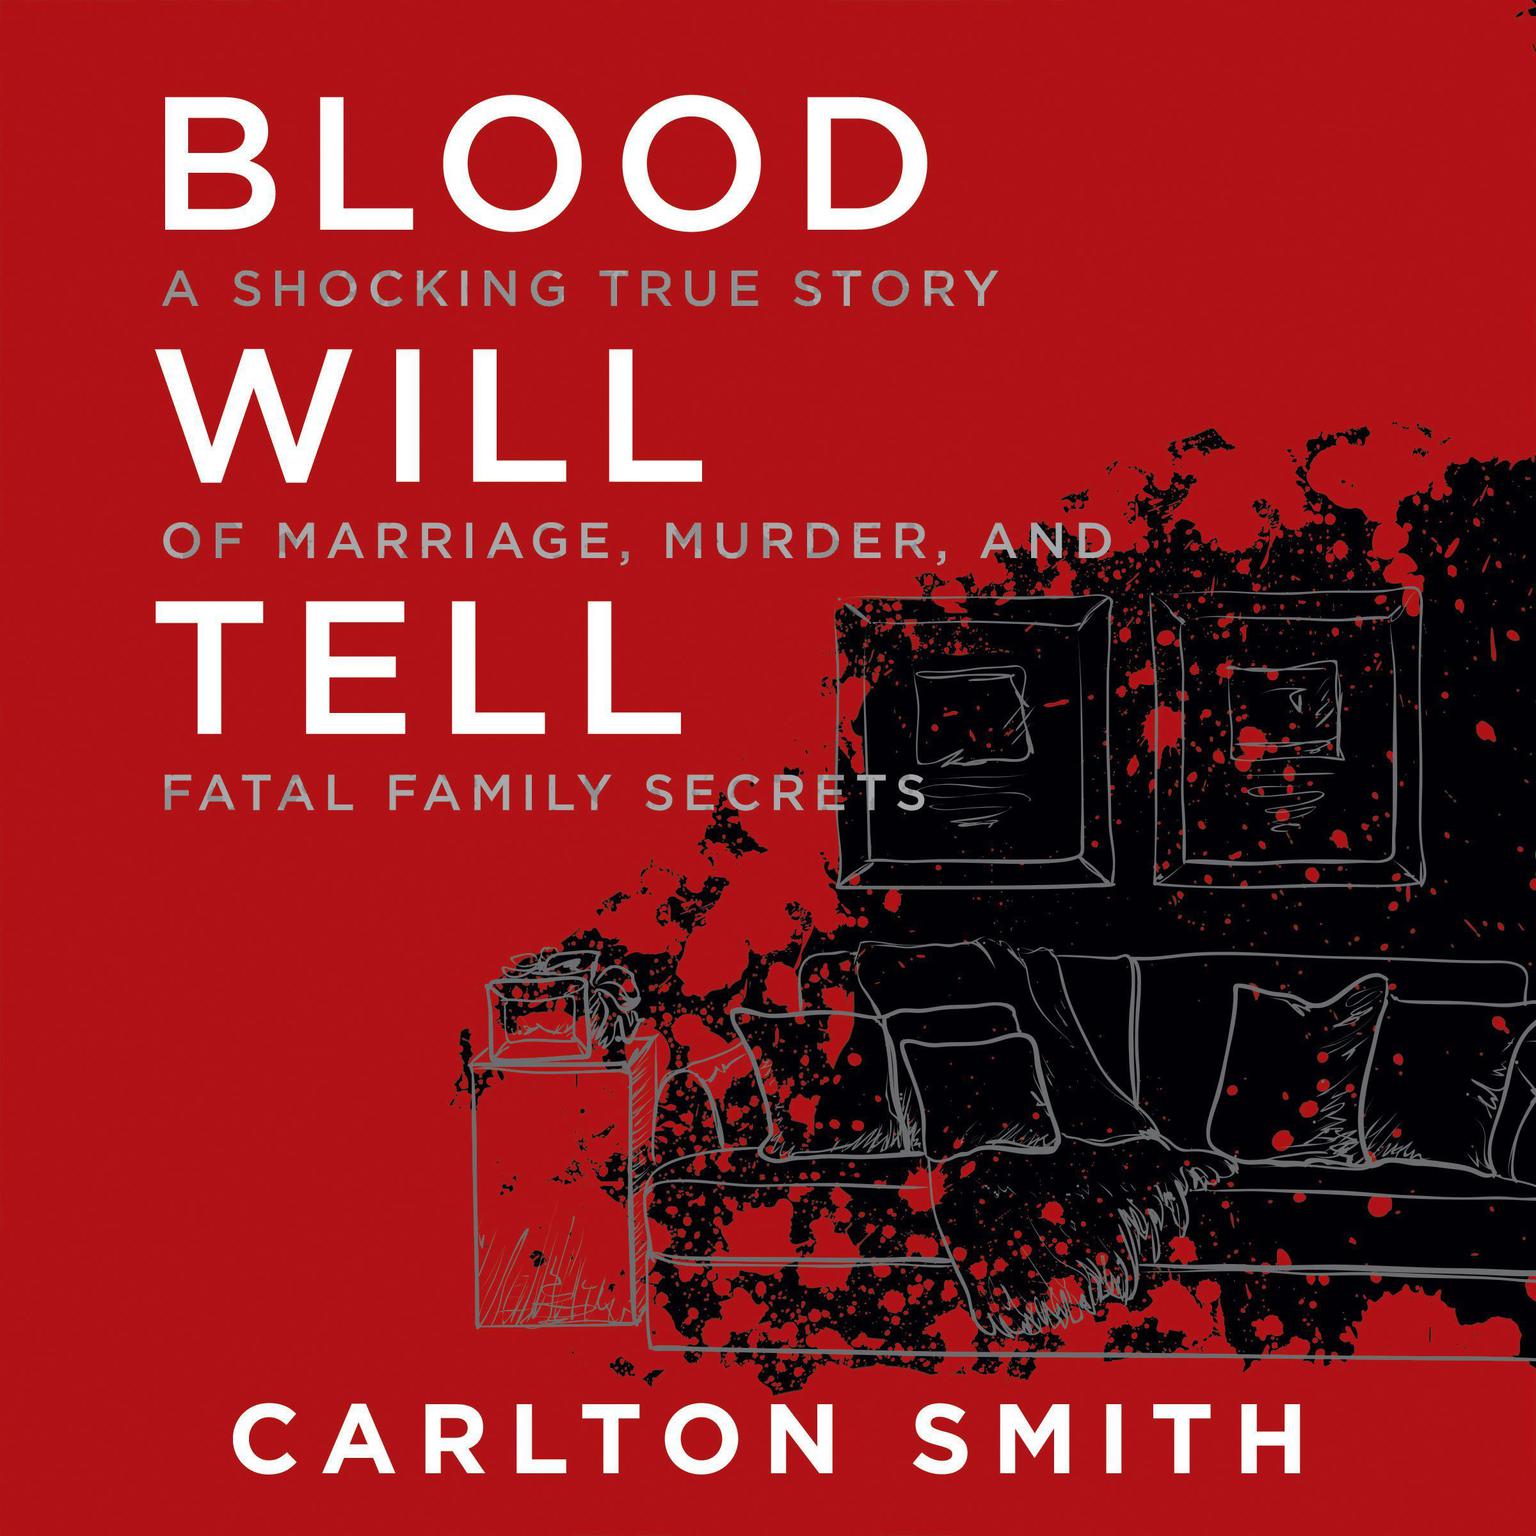 Blood Will Tell: A Shocking True Story of Marriage, Murder, and Fatal Family Secrets Audiobook, by Carlton Smith